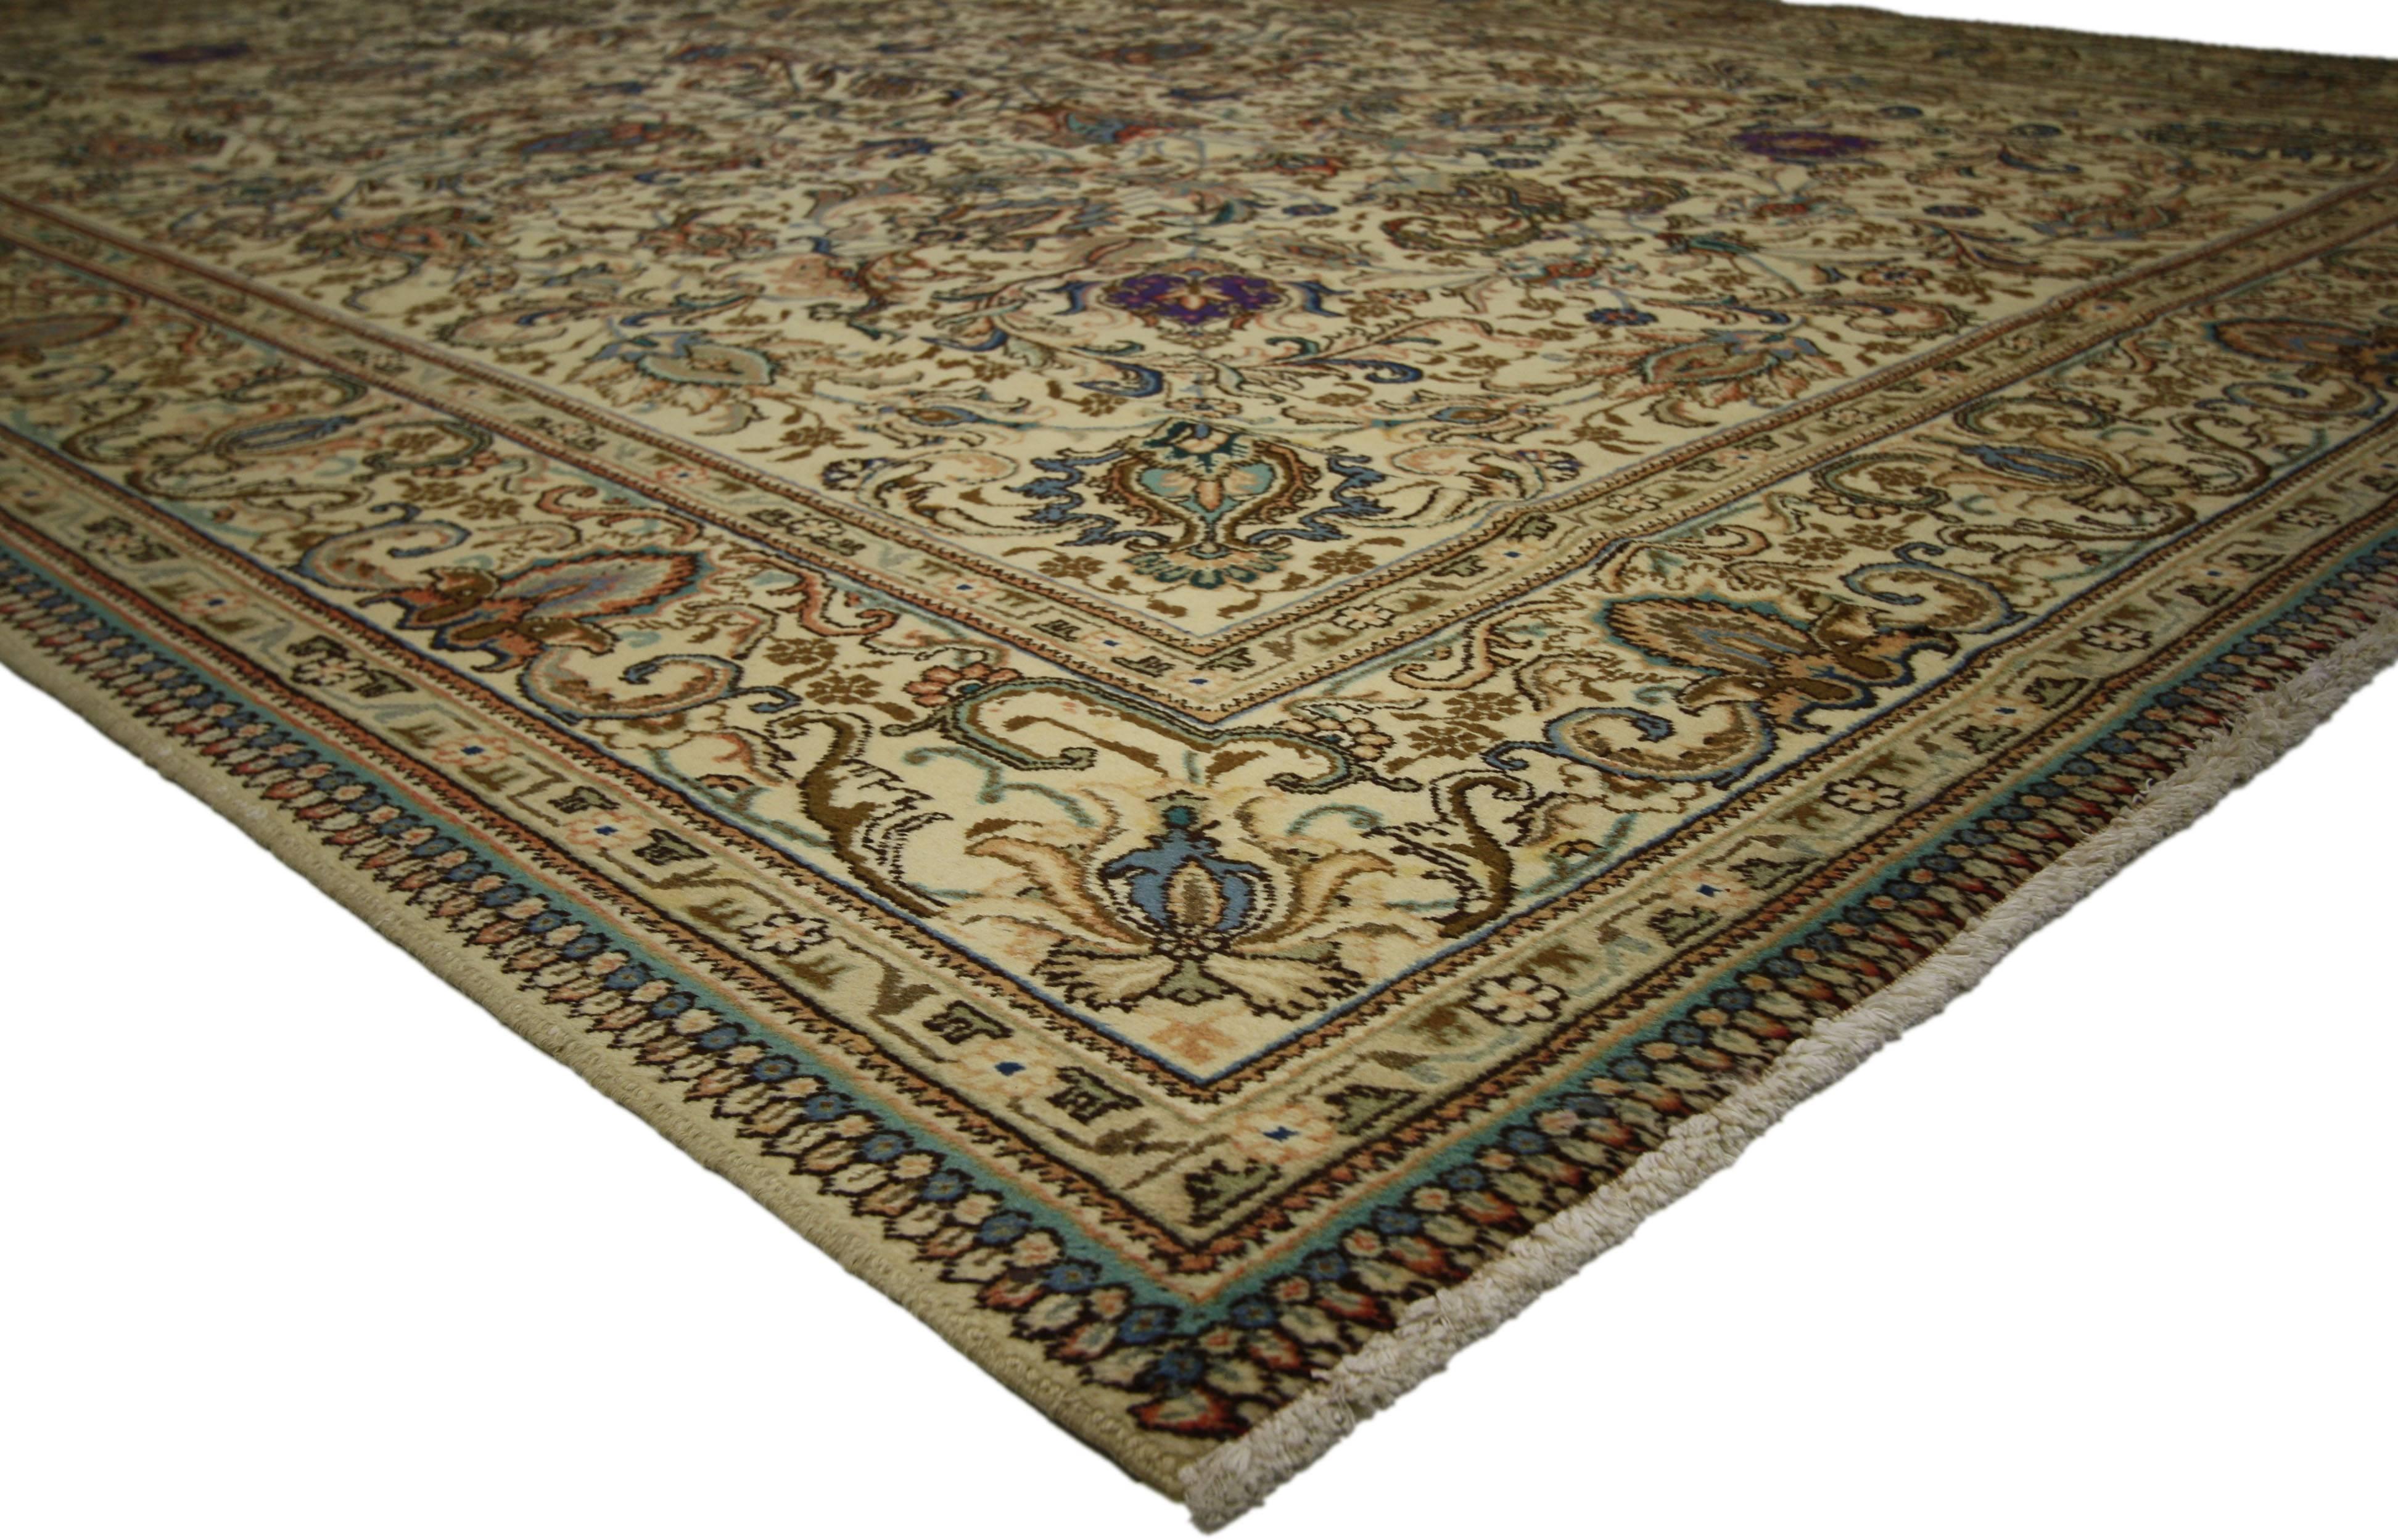 76412 Vintage Persian Tabriz Area Rug 09'06 x 12'10. Timeless and refined, this hand-knotted wool vintage Persian Tabriz rug features an all-over floral patter composed of blooming palmettes, leafy tendrils, rosettes, and swirling arabesque vines